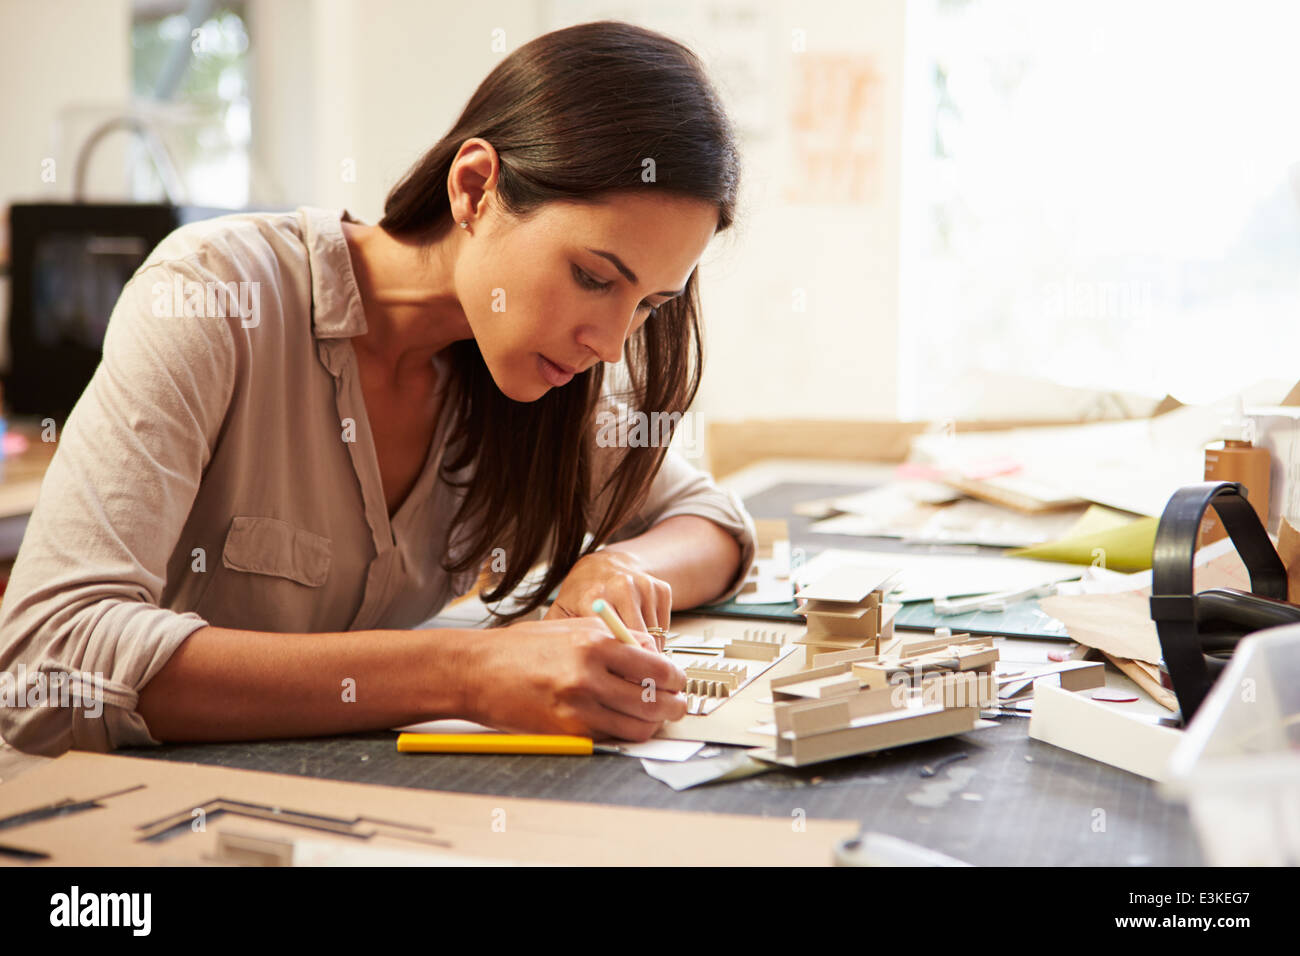 Female Architect Making Model In Office Stock Photo